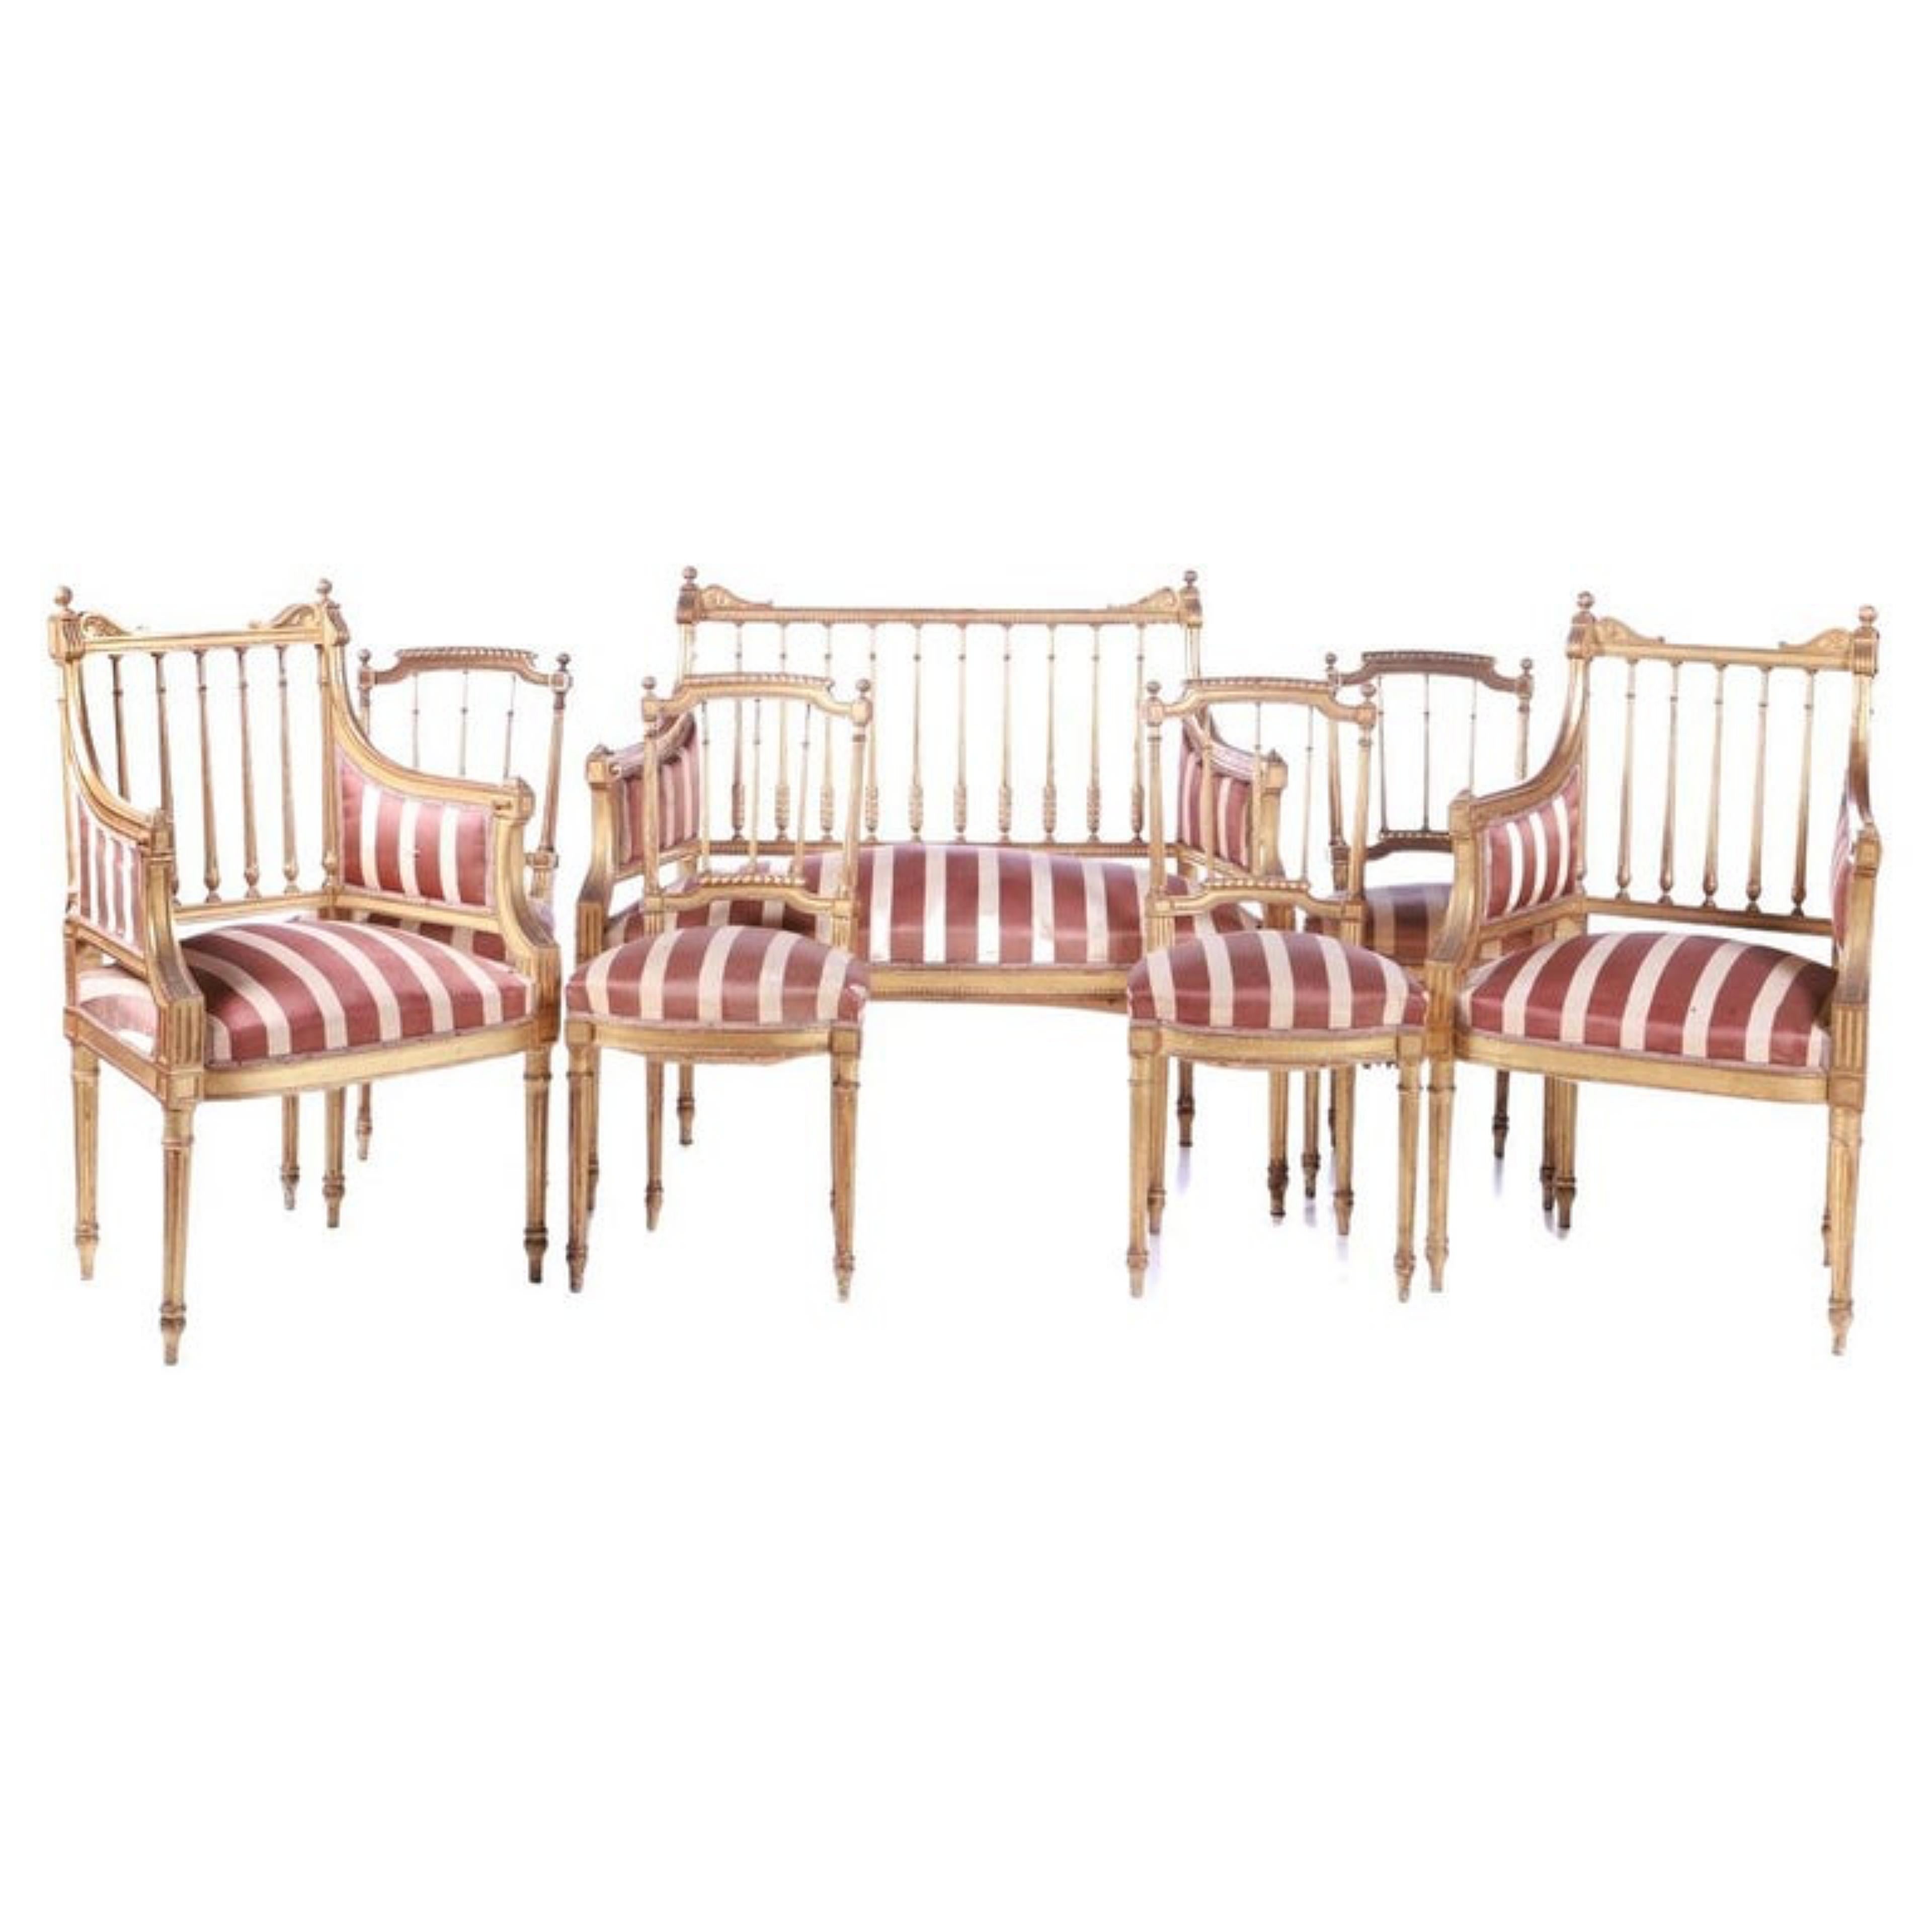 Wood French Canape Set, 4 Chairs and 2 Armchairs Late 19th Century Early 20th Century For Sale